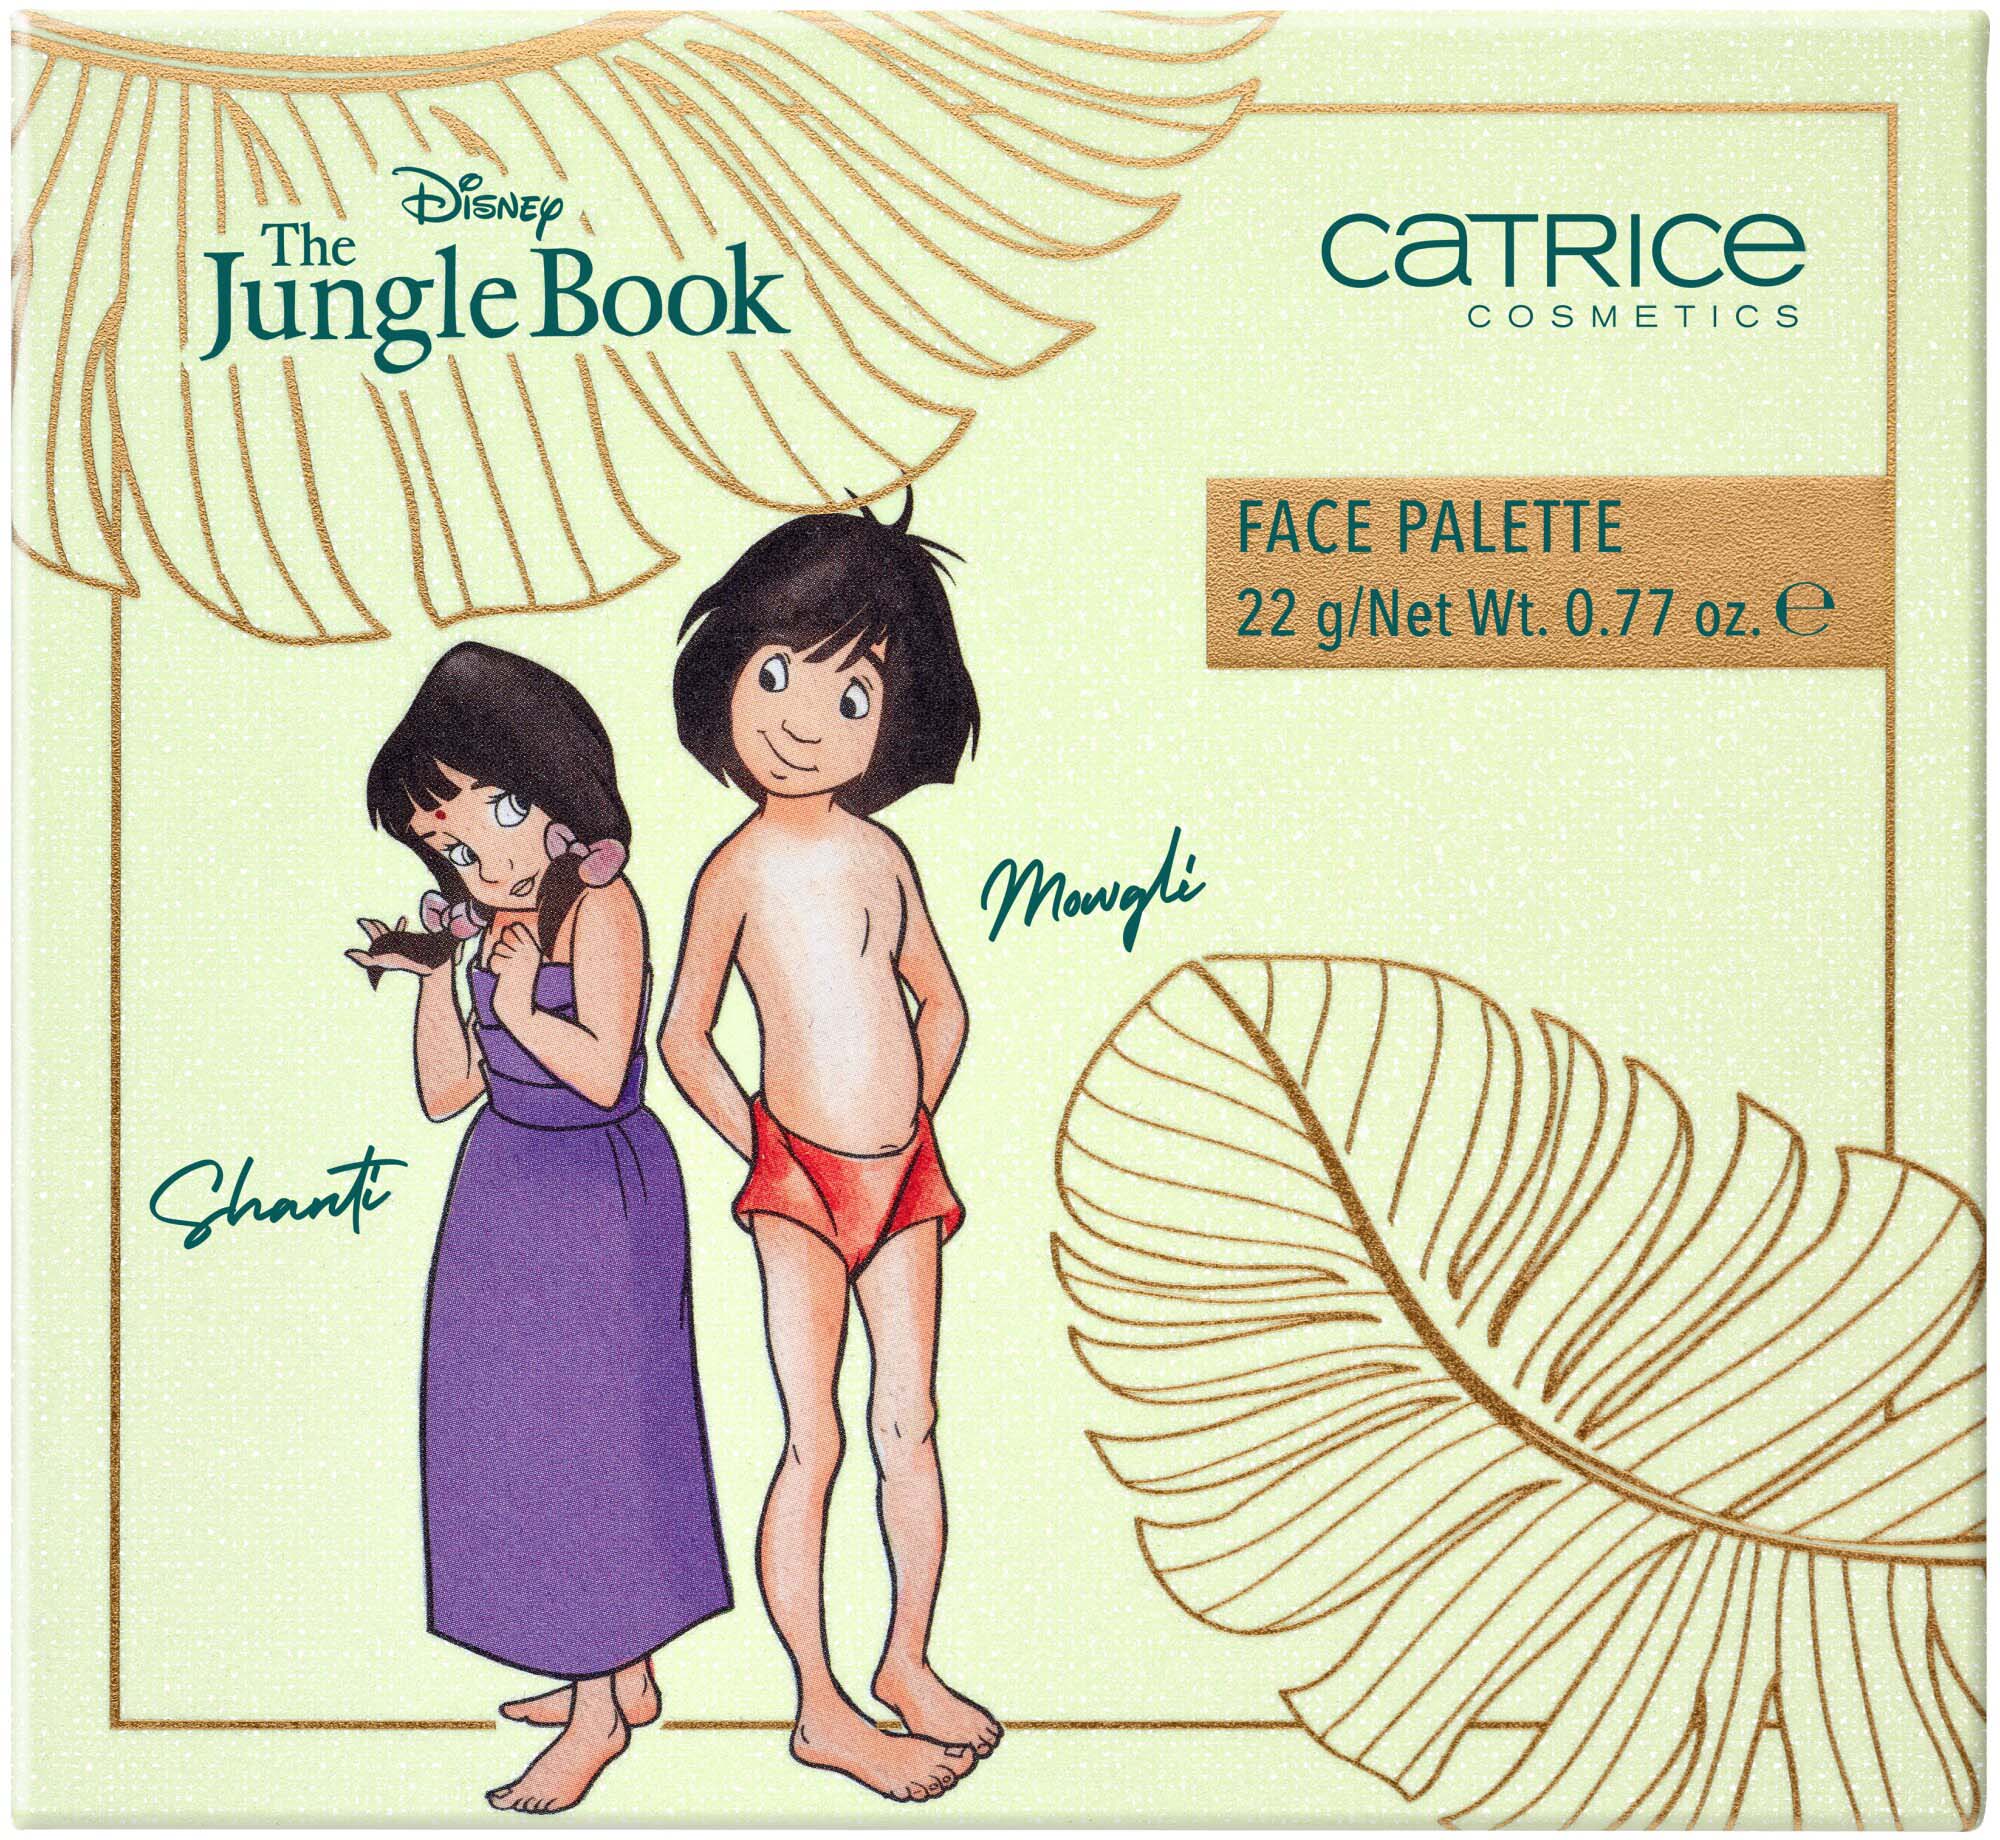 020 Disney Wild The Face Book About Jungle Catrice Palette You